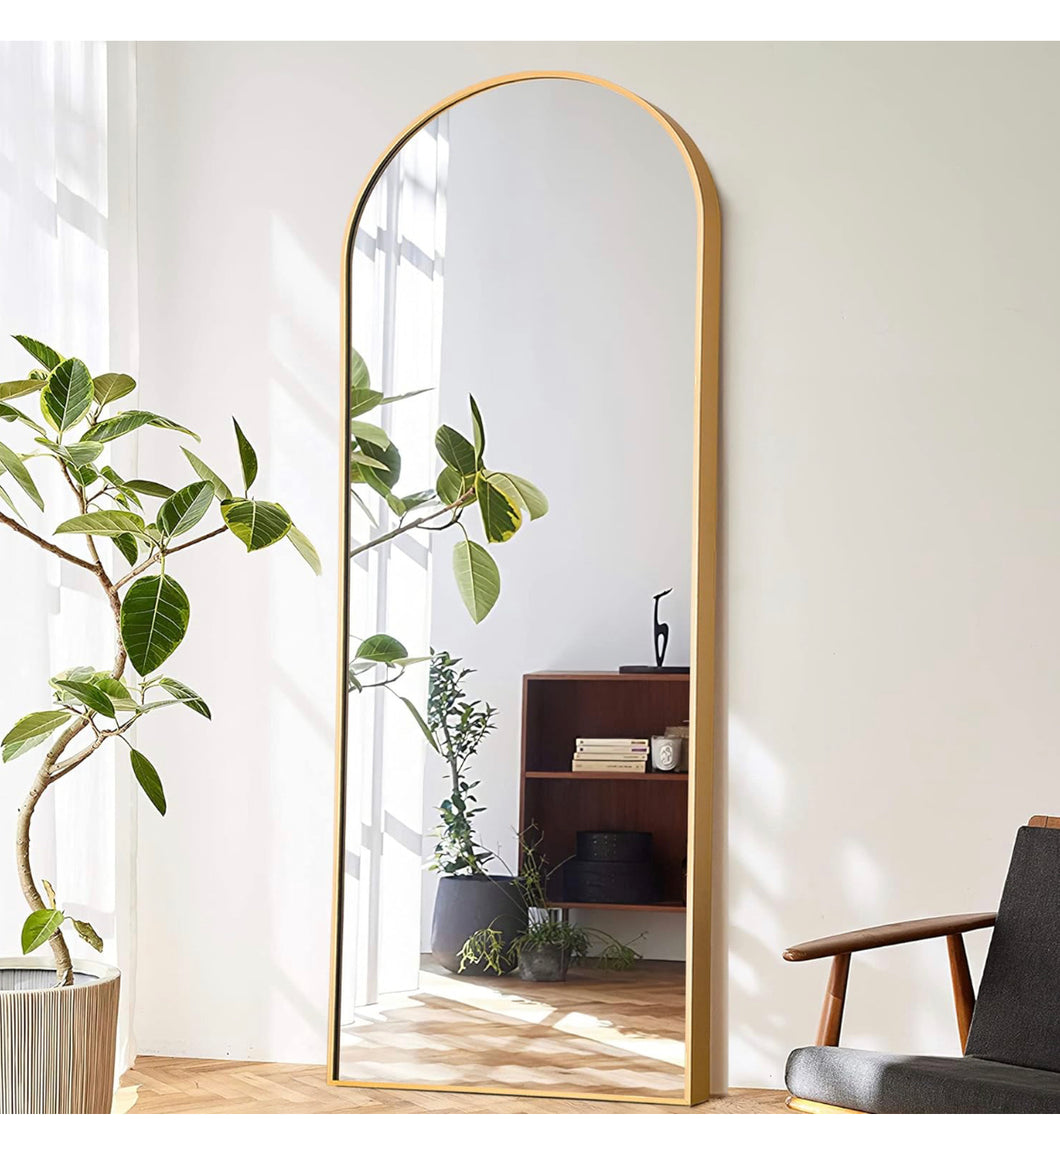 NeuType Arched Full Length Mirror Standing Hanging or Leaning Against Wall, Oversized Large Bedroom Mirror Floor Mirror Dressing Mirror, Aluminum Alloy Thin Frame, Gold, 71